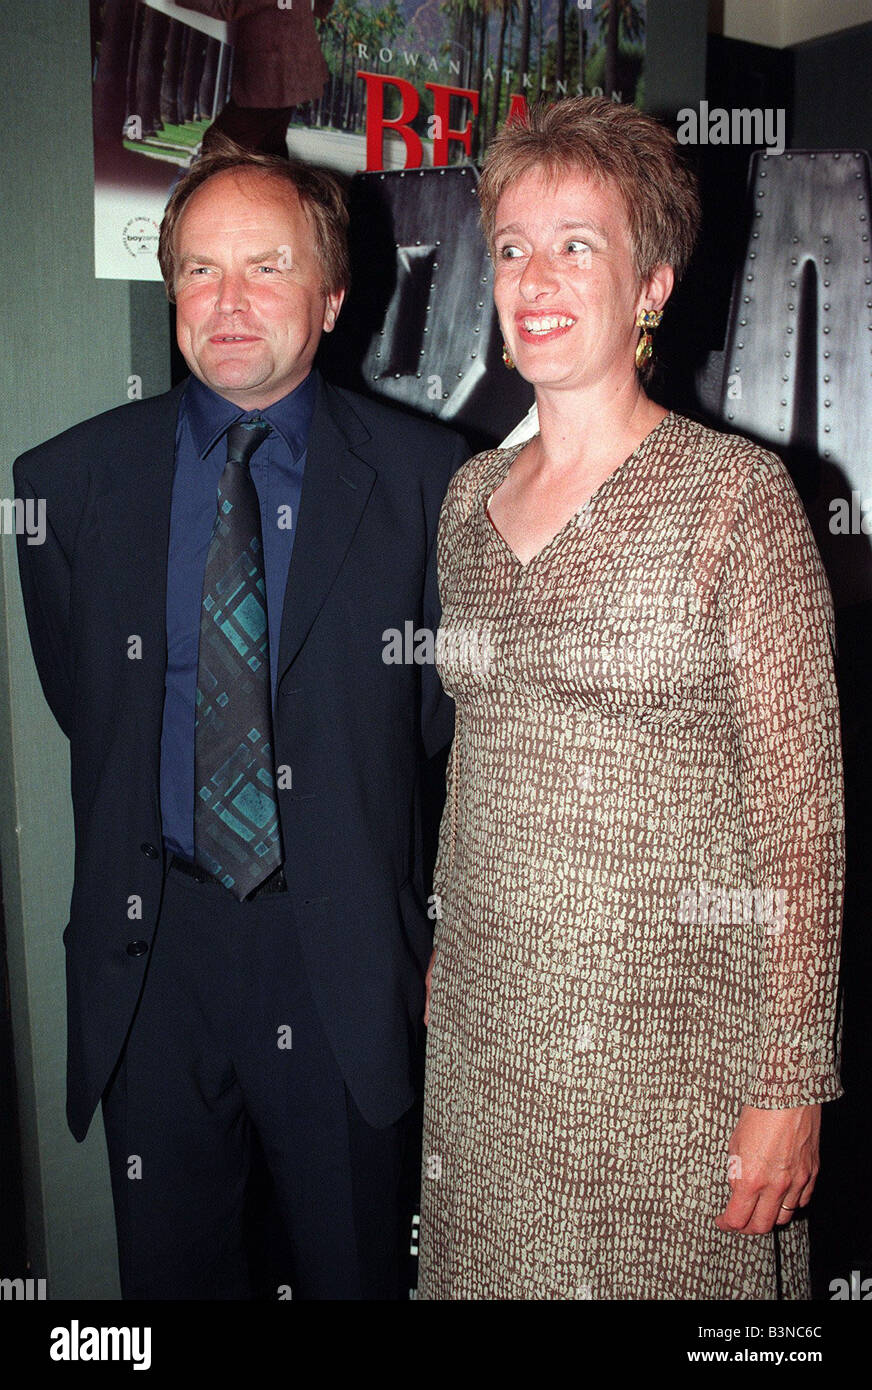 Clive Anderson Tv presenter wife Jane in August 1997 at the film premiere of Mr Bean mirrorpix weby Stock Photo